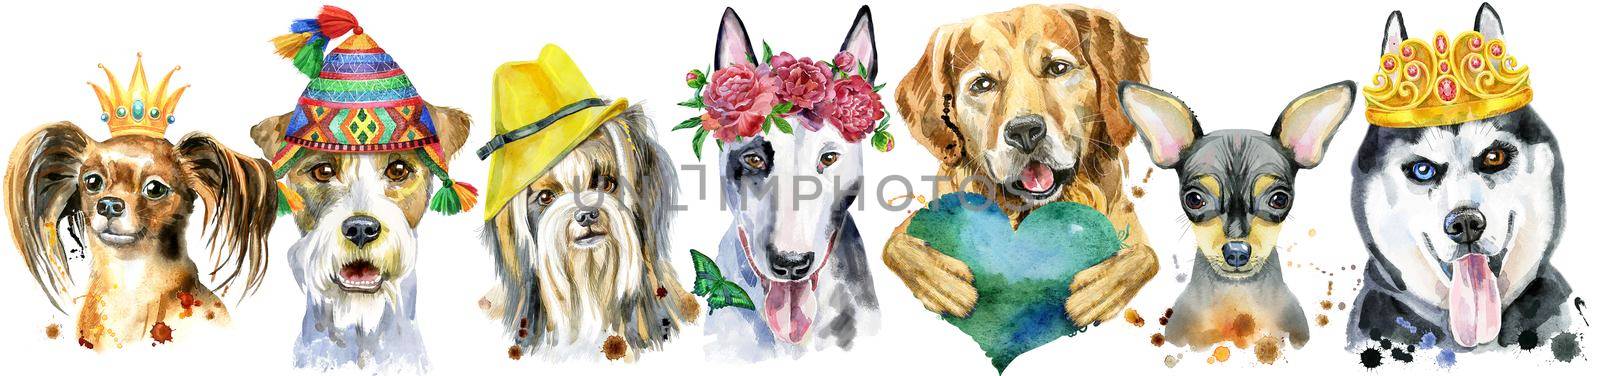 Border from watercolor portraits of dogs for decoration by NataOmsk